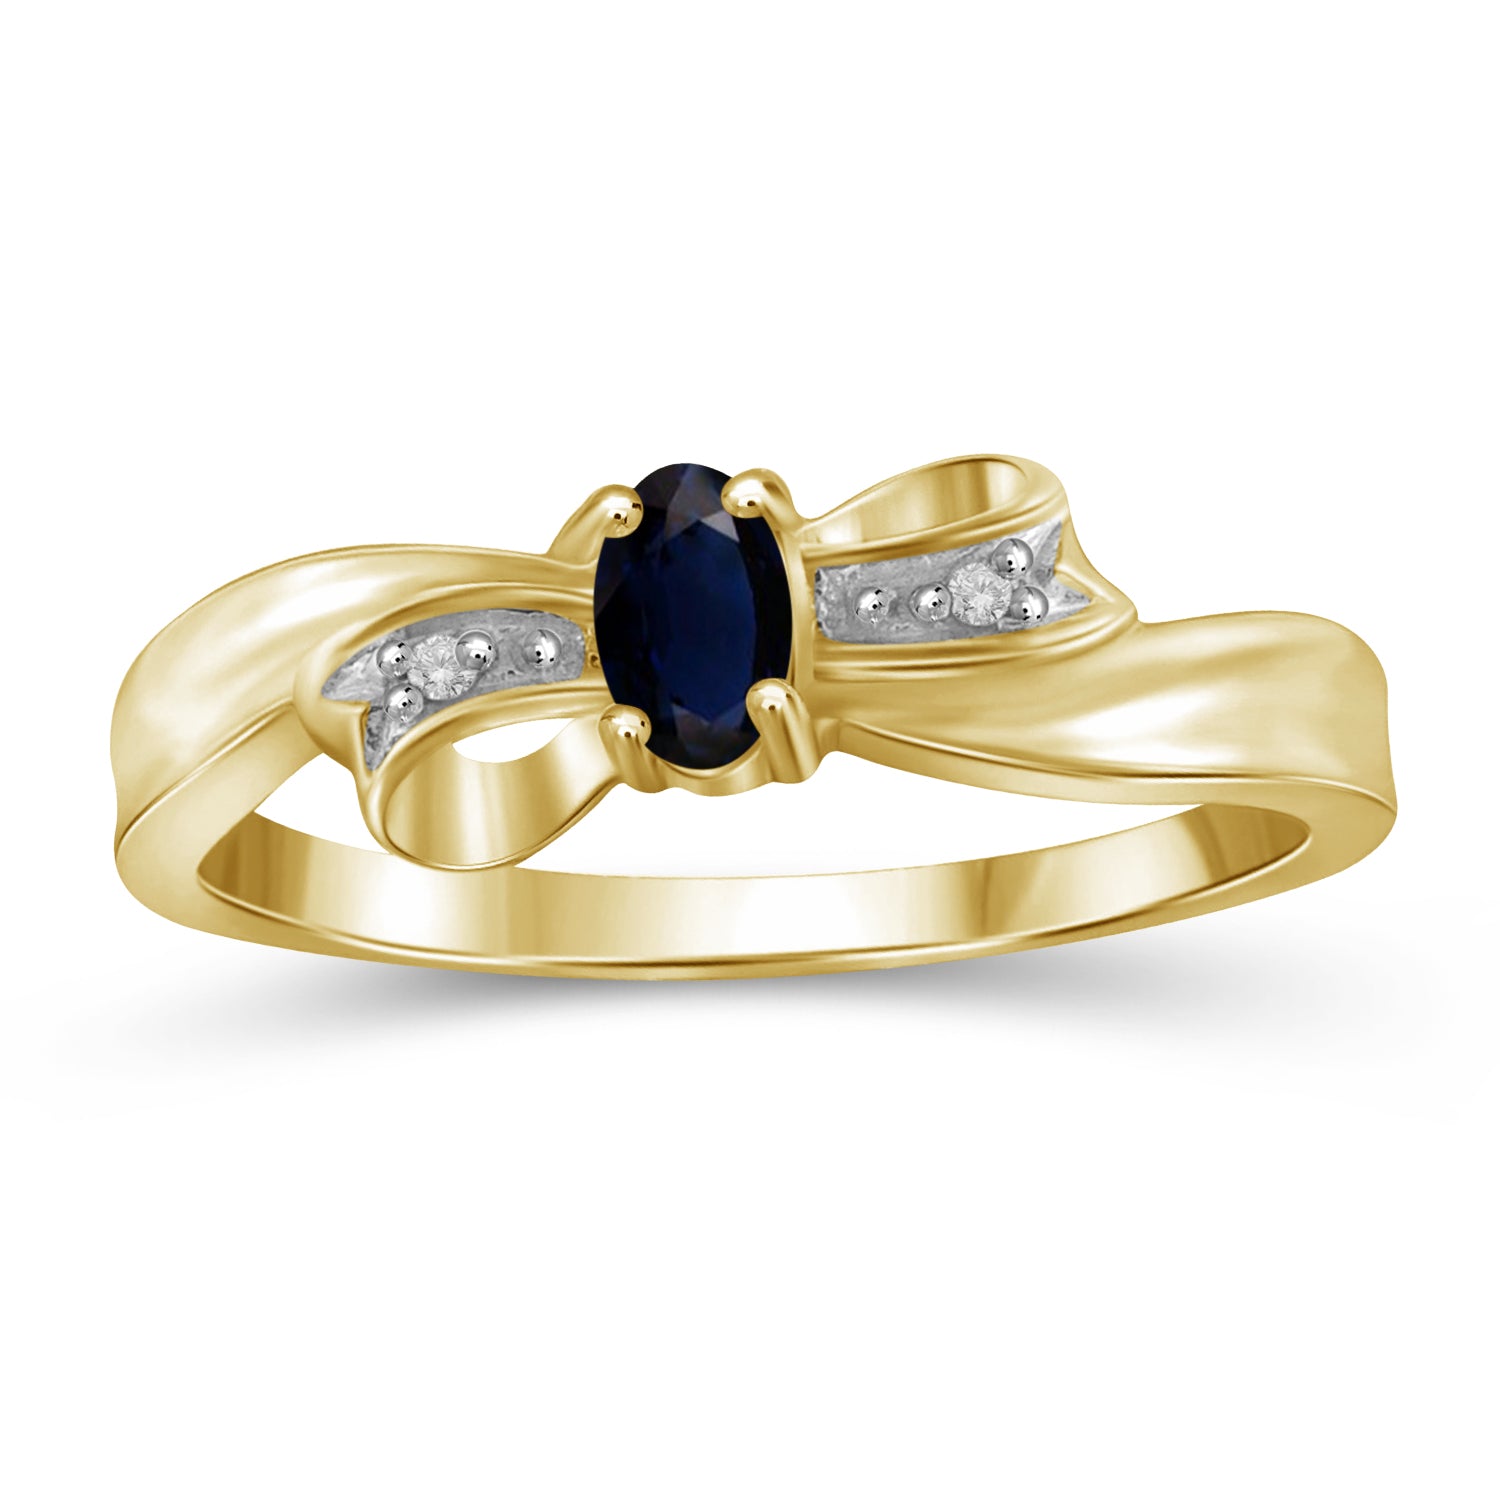 Sapphire Ring Birthstone Jewelry – 0.33 Carat Sapphire 14K Gold-Plated Ring Jewelry with White Diamond Accent – Gemstone Rings with Hypoallergenic 14K Gold-Plated Band